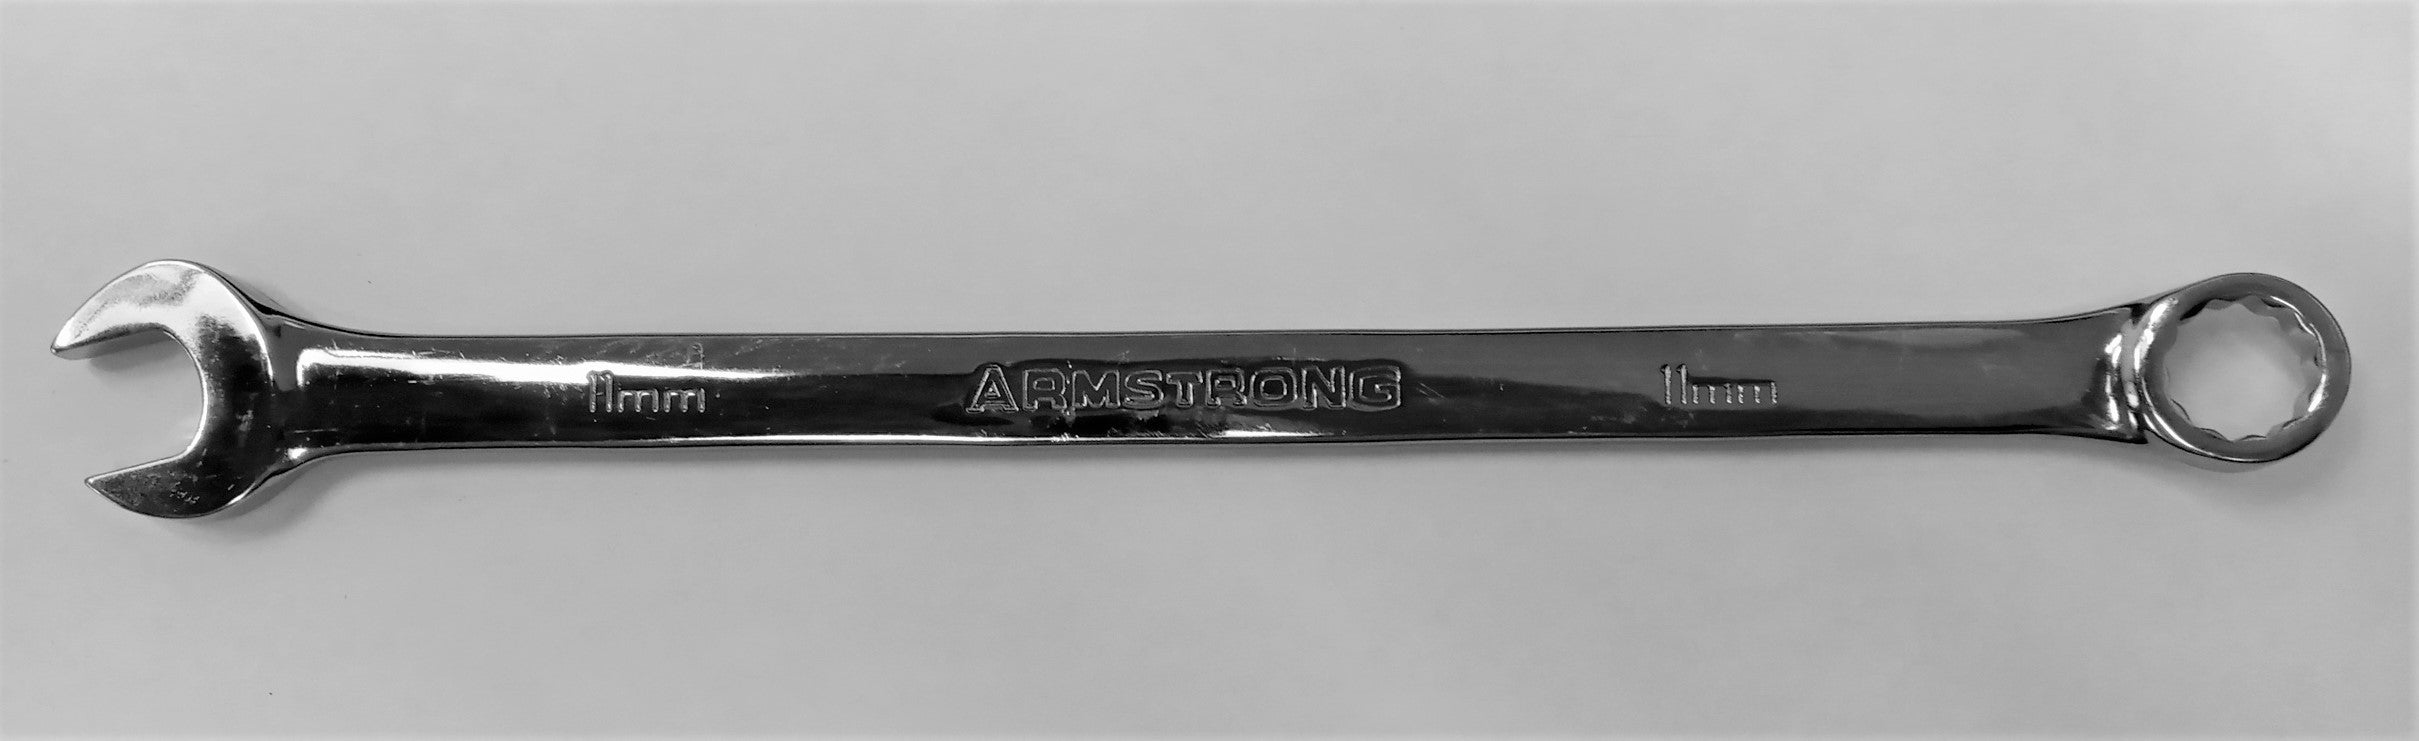 Armstrong 52-411 11mm Full Polish Extra Long Combination Wrench 12pt. USA